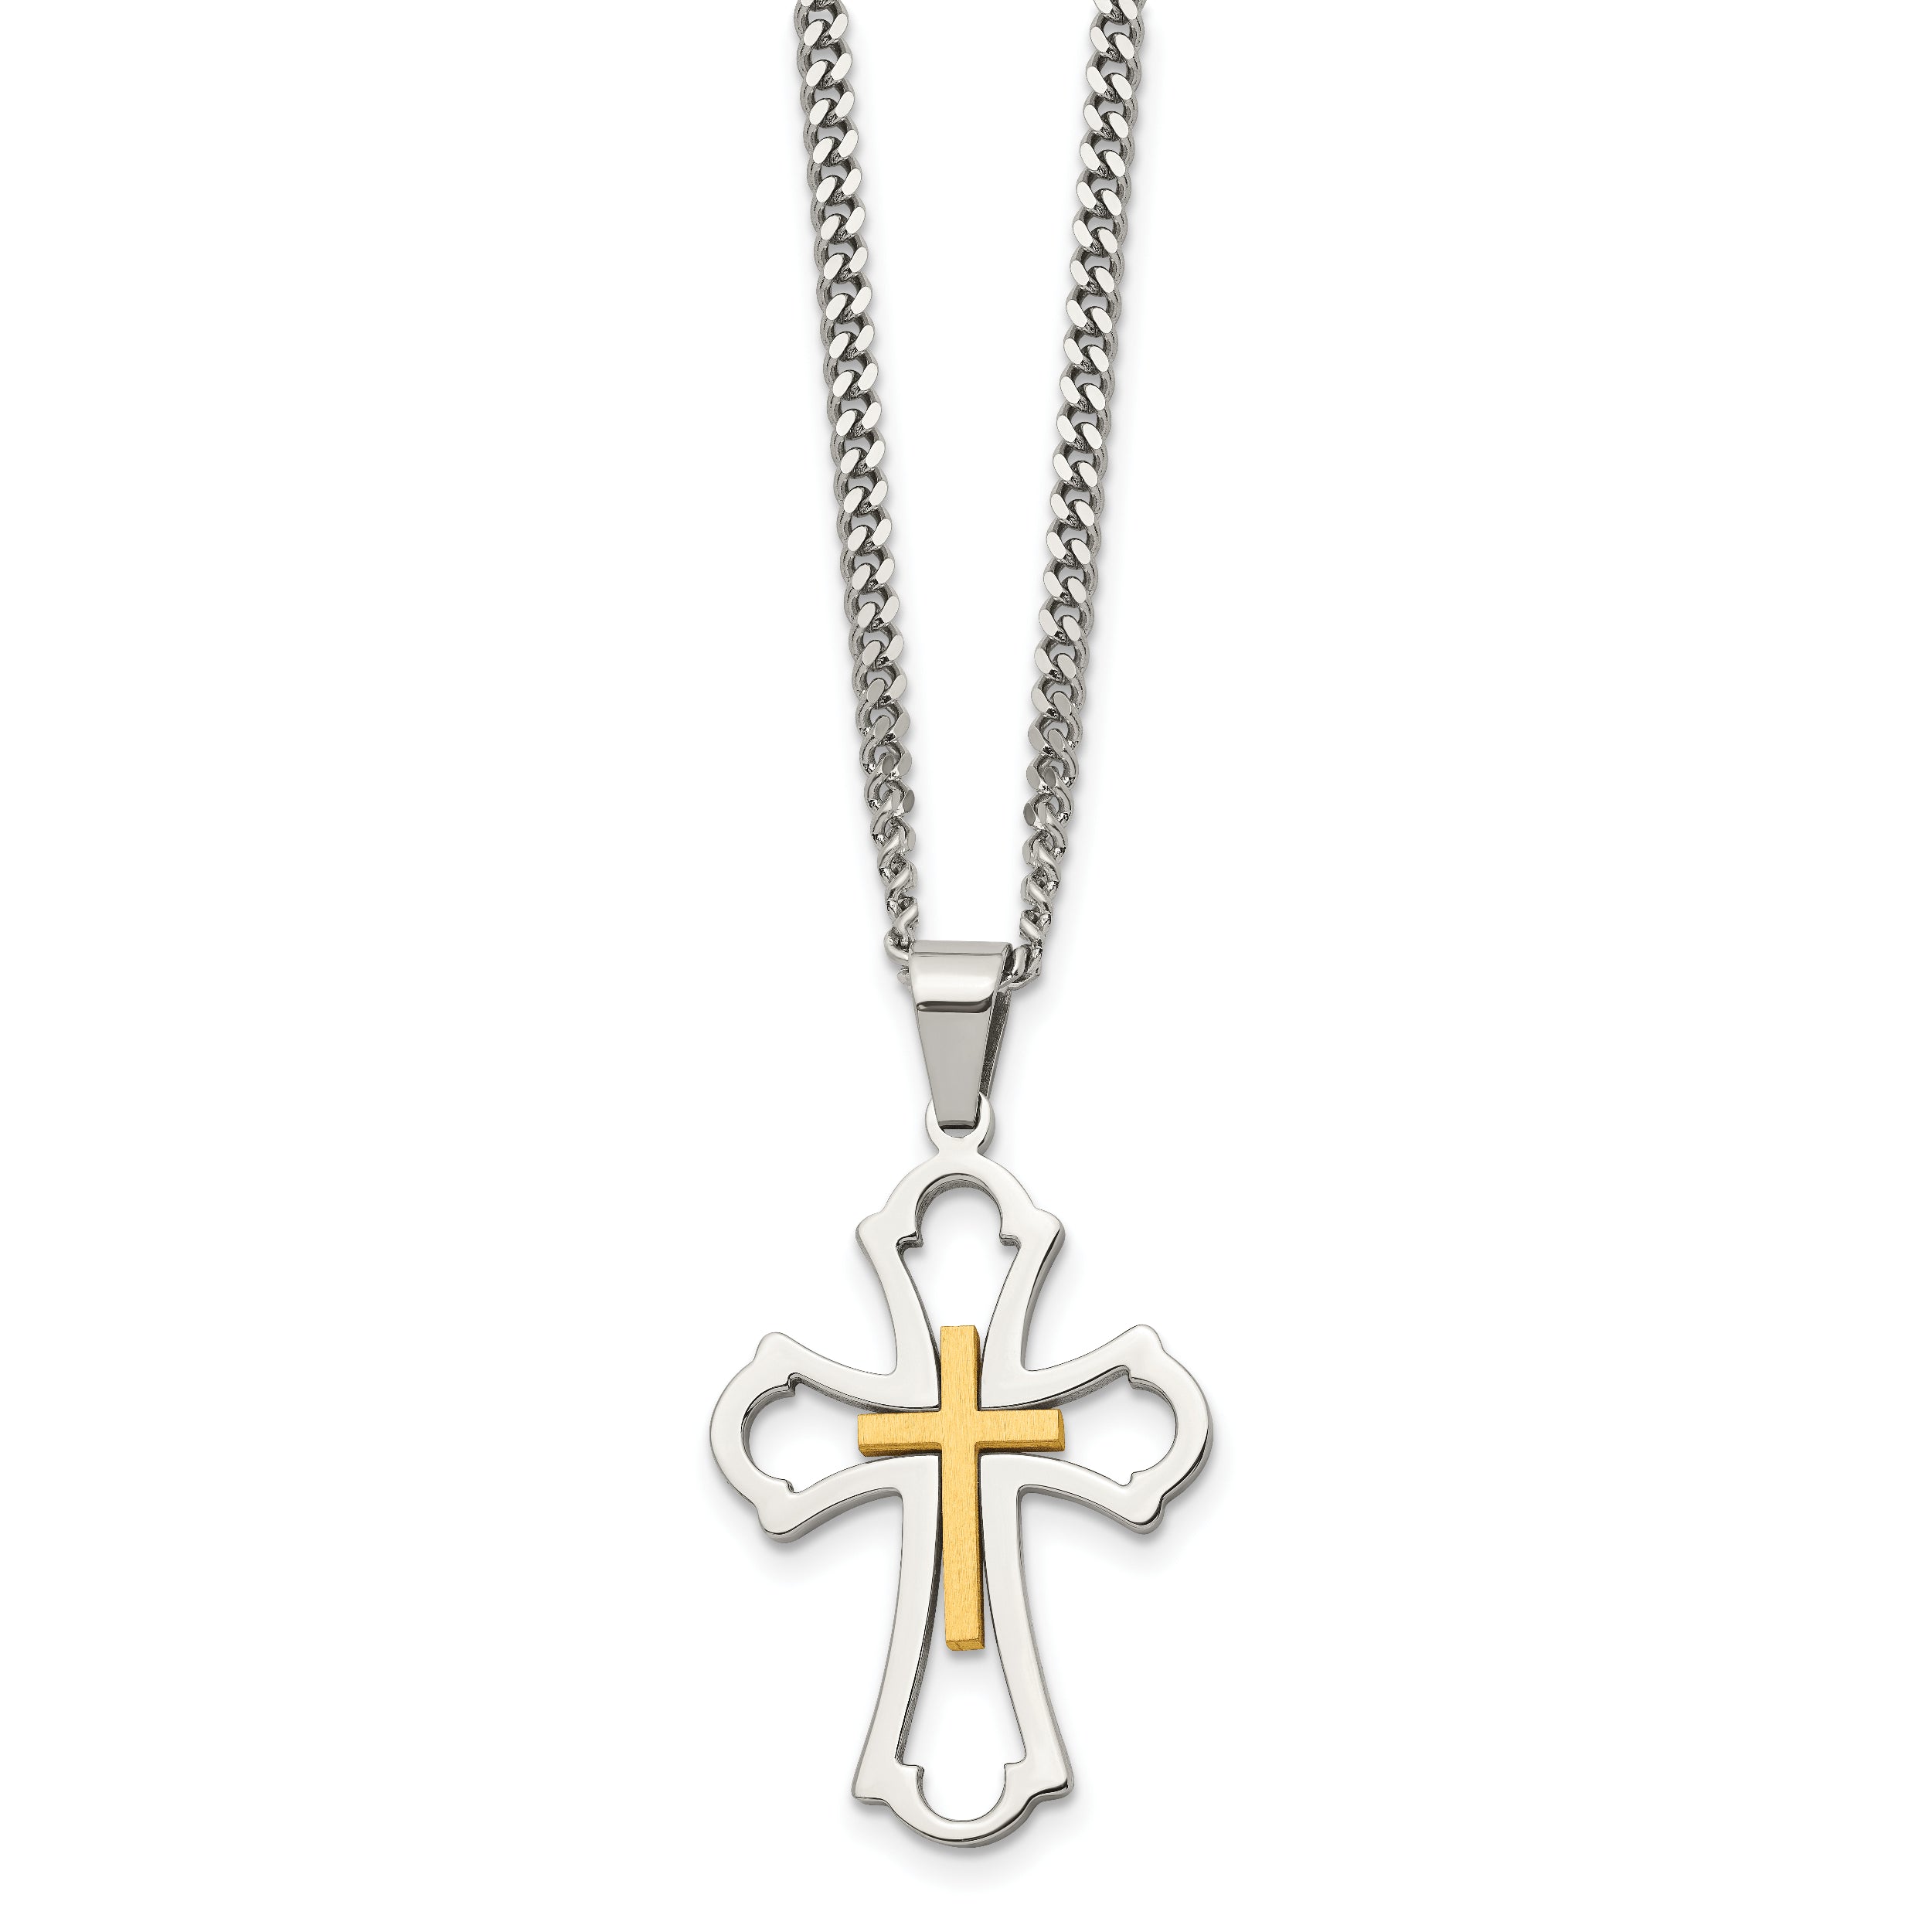 Chisel Stainless Steel Brushed and Polished Yellow IP-plated Cross Pendant on a 22 inch Curb Chain Necklace